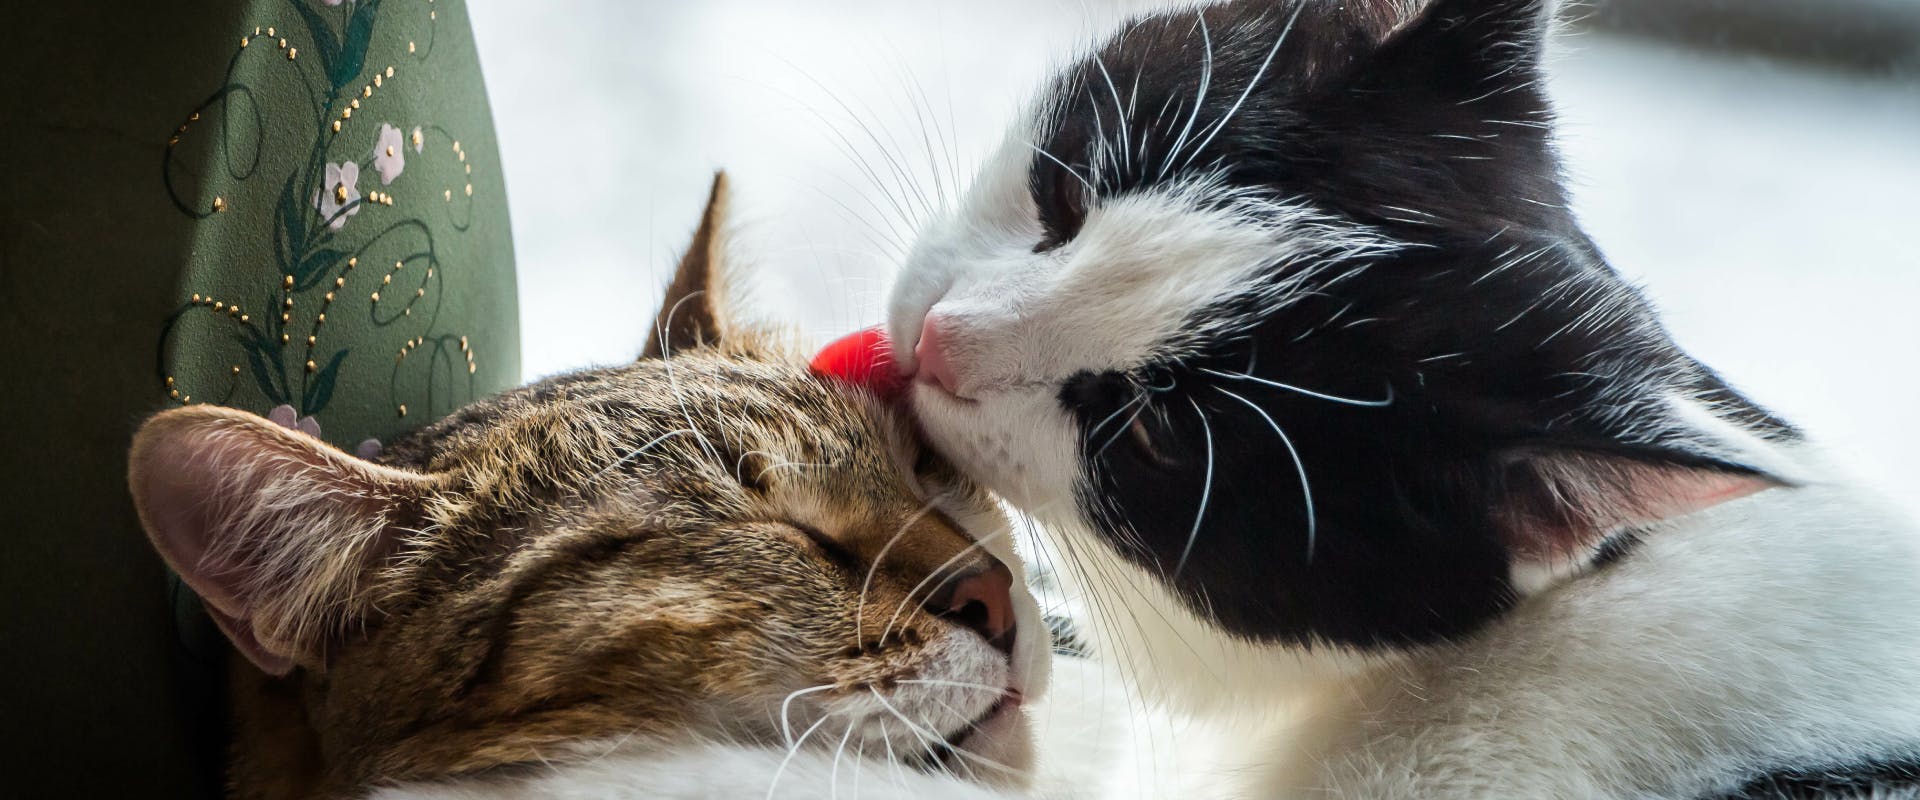 a black and white cat licking a tabby cat on the face